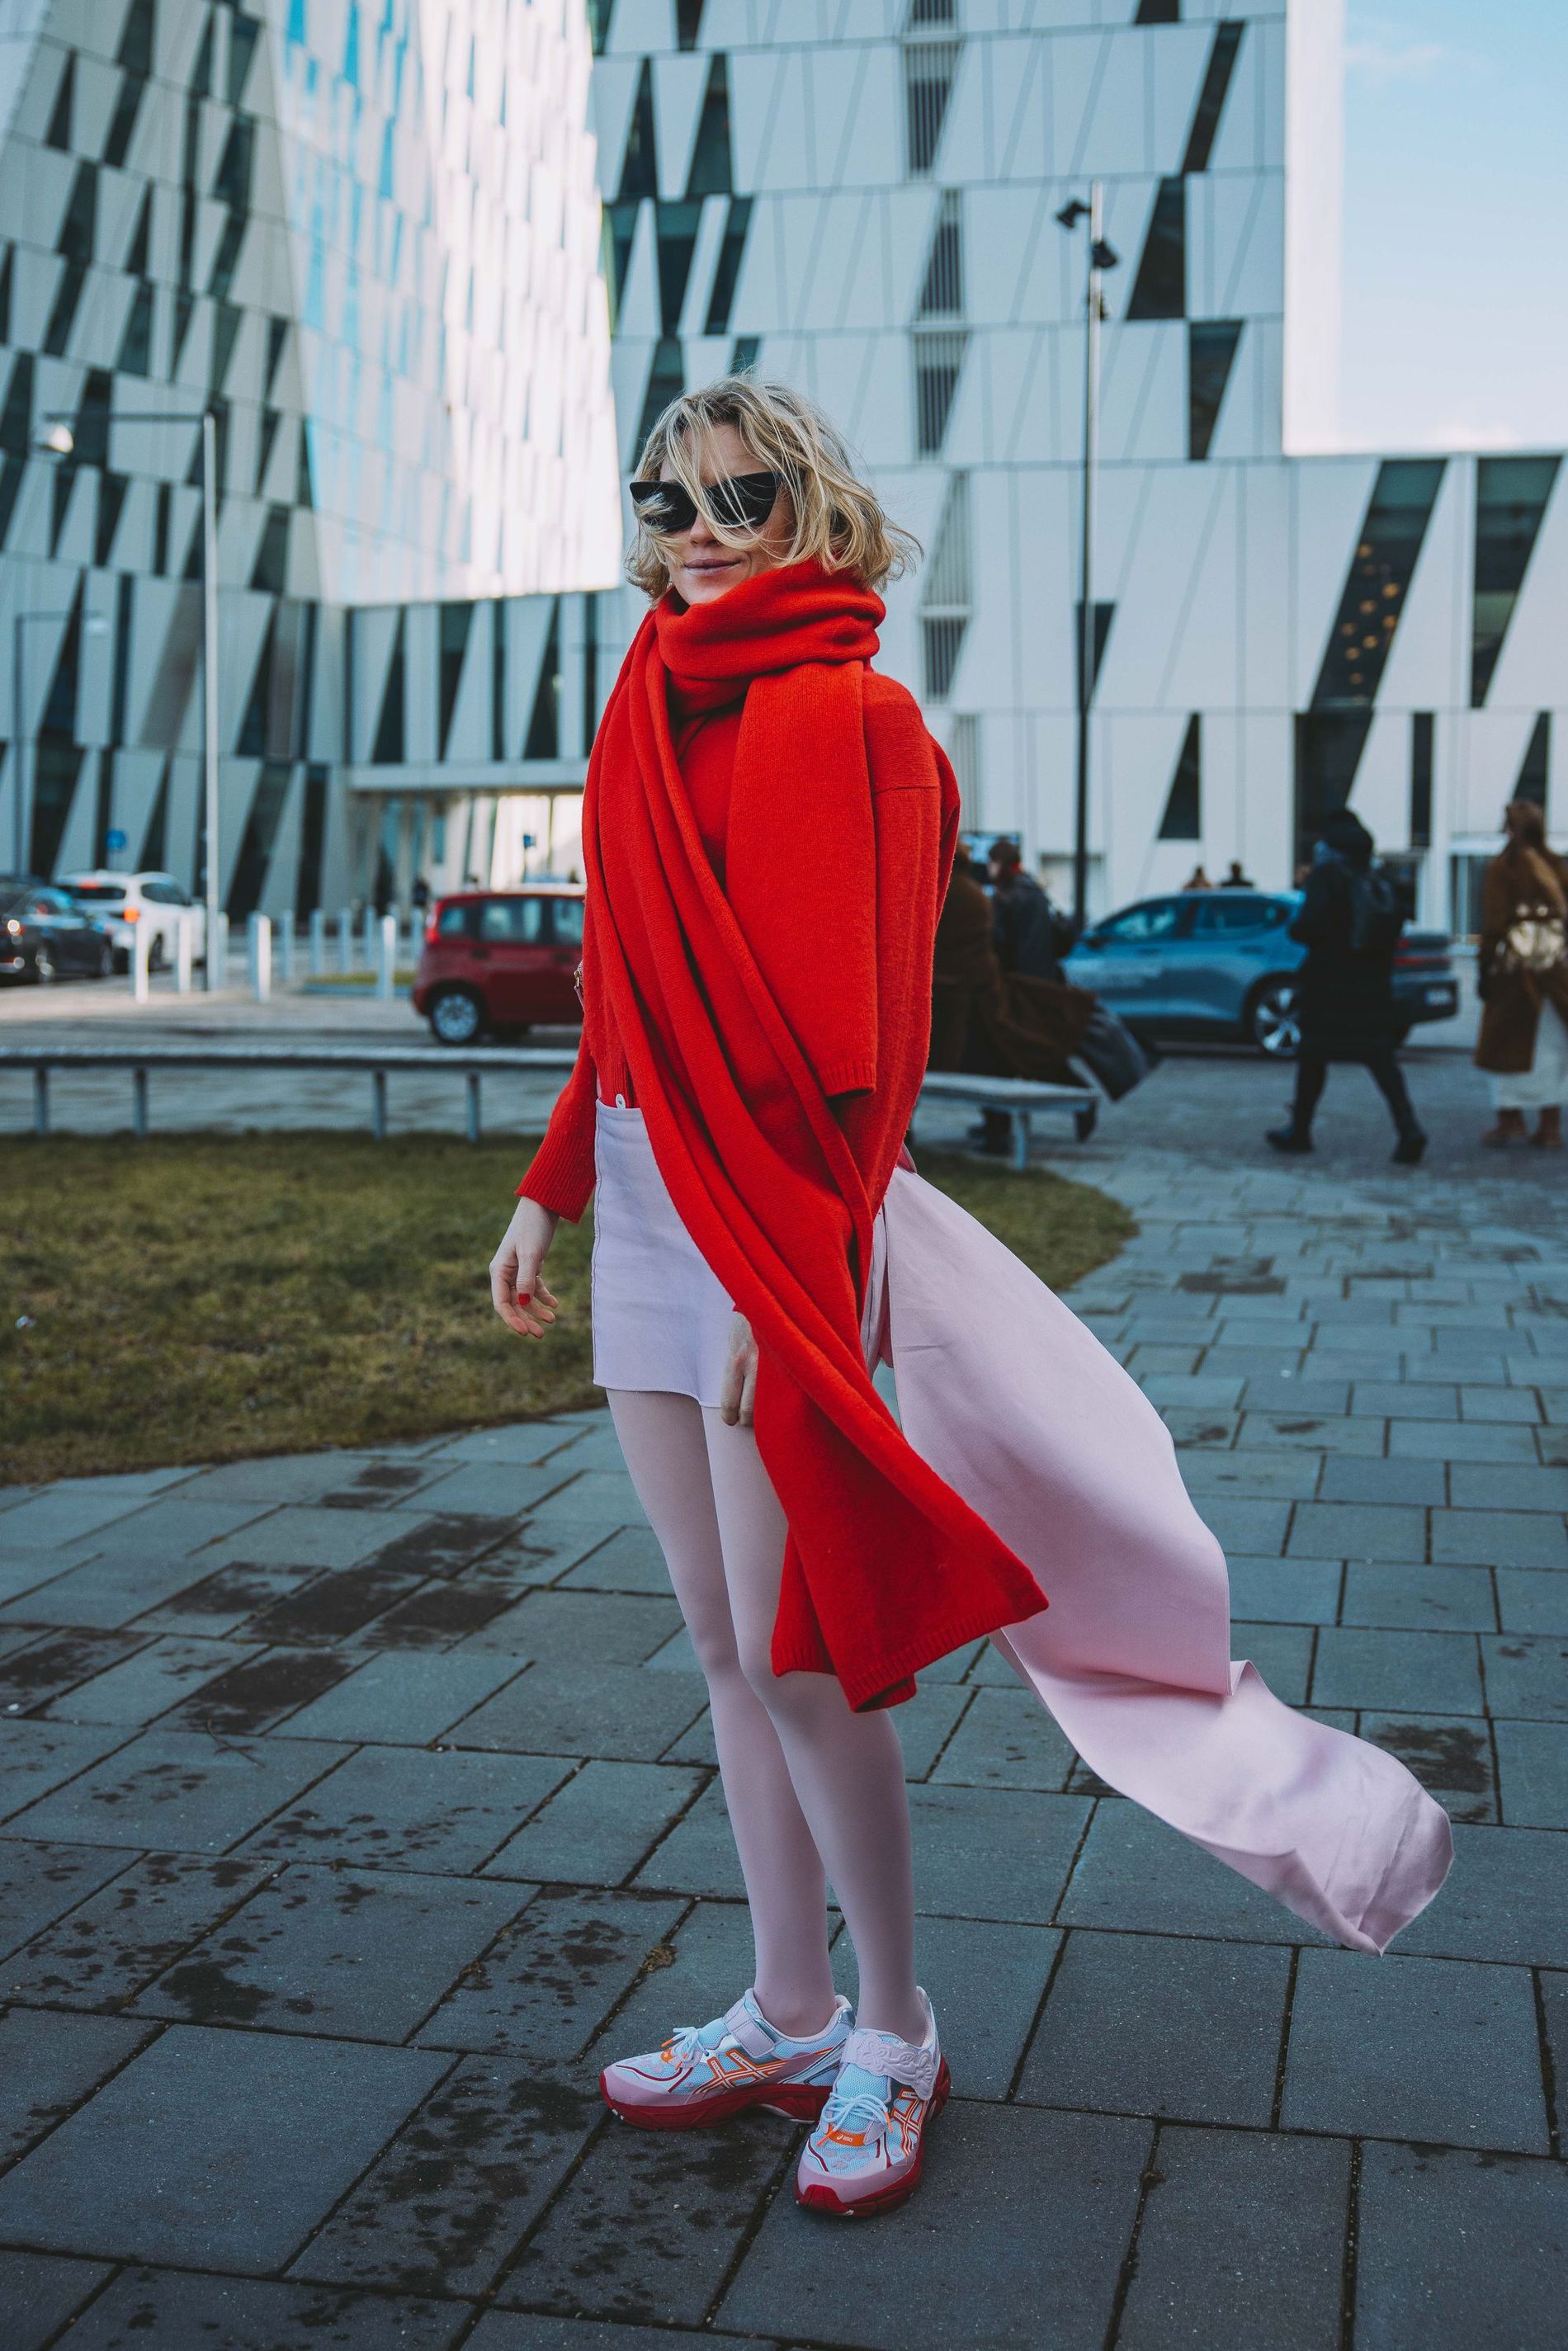 A guest wears the two-tone styling trend, pairing powder pink stockings and a skirt with bright red knitwear